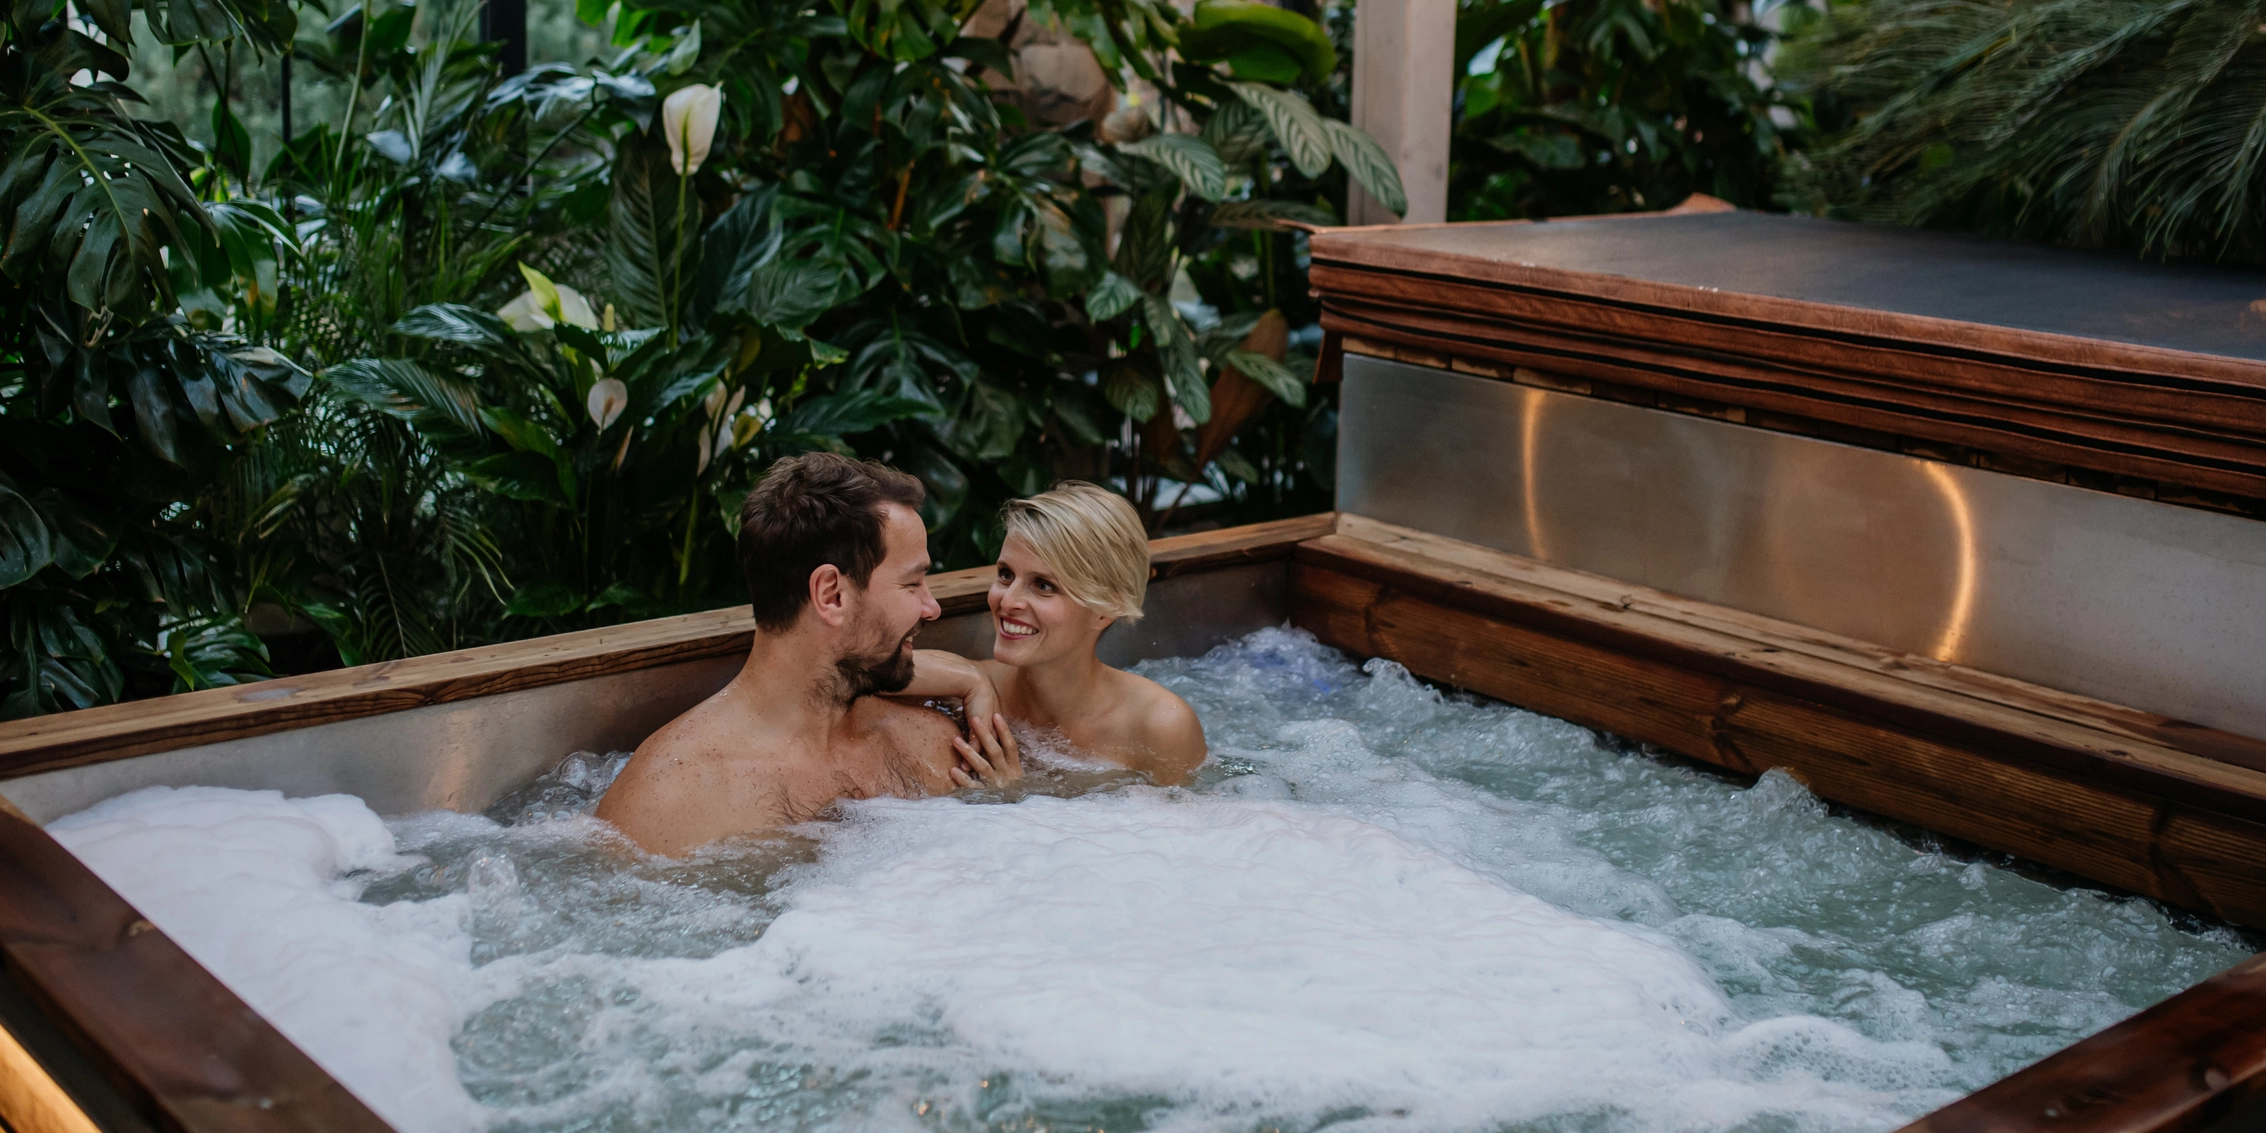 The Ultimate Hot Tub Ownership Experience with Arizona Hot Tub Company's Valet Service